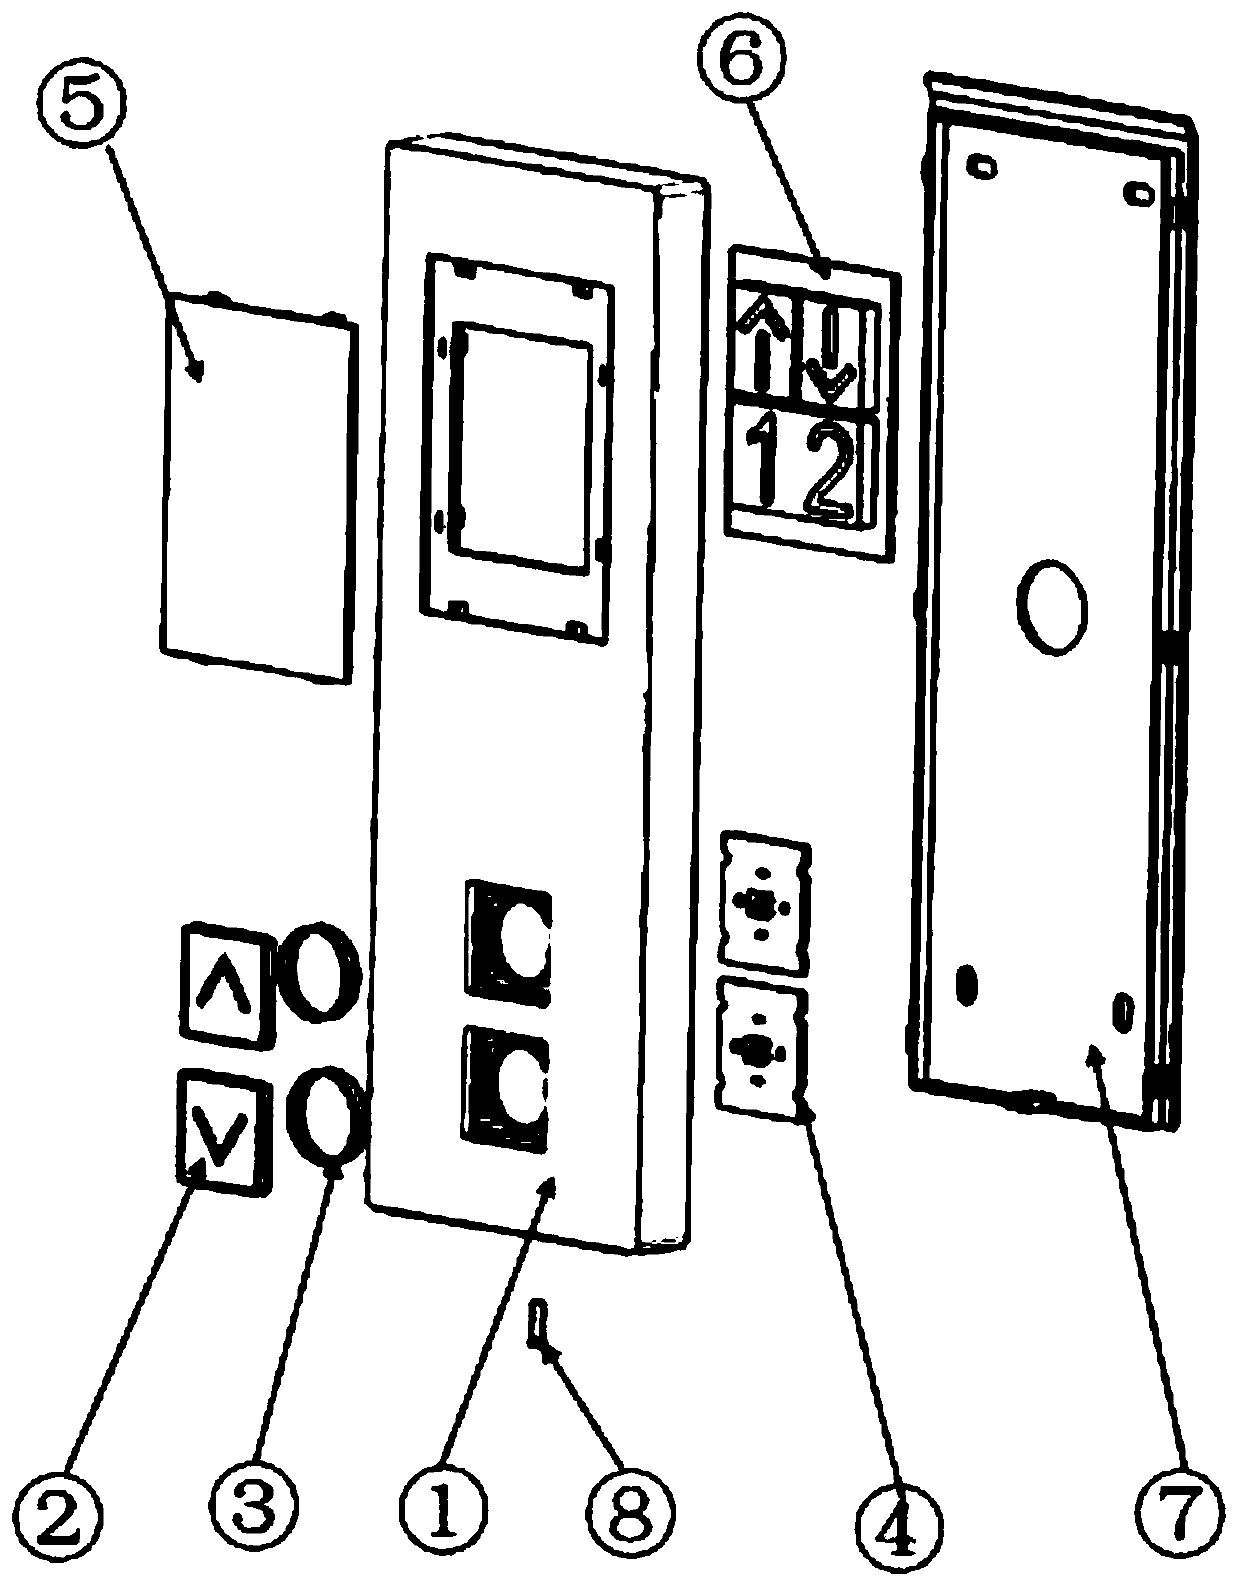 Hall call device achieving integrated assembly of button shell body and buckles